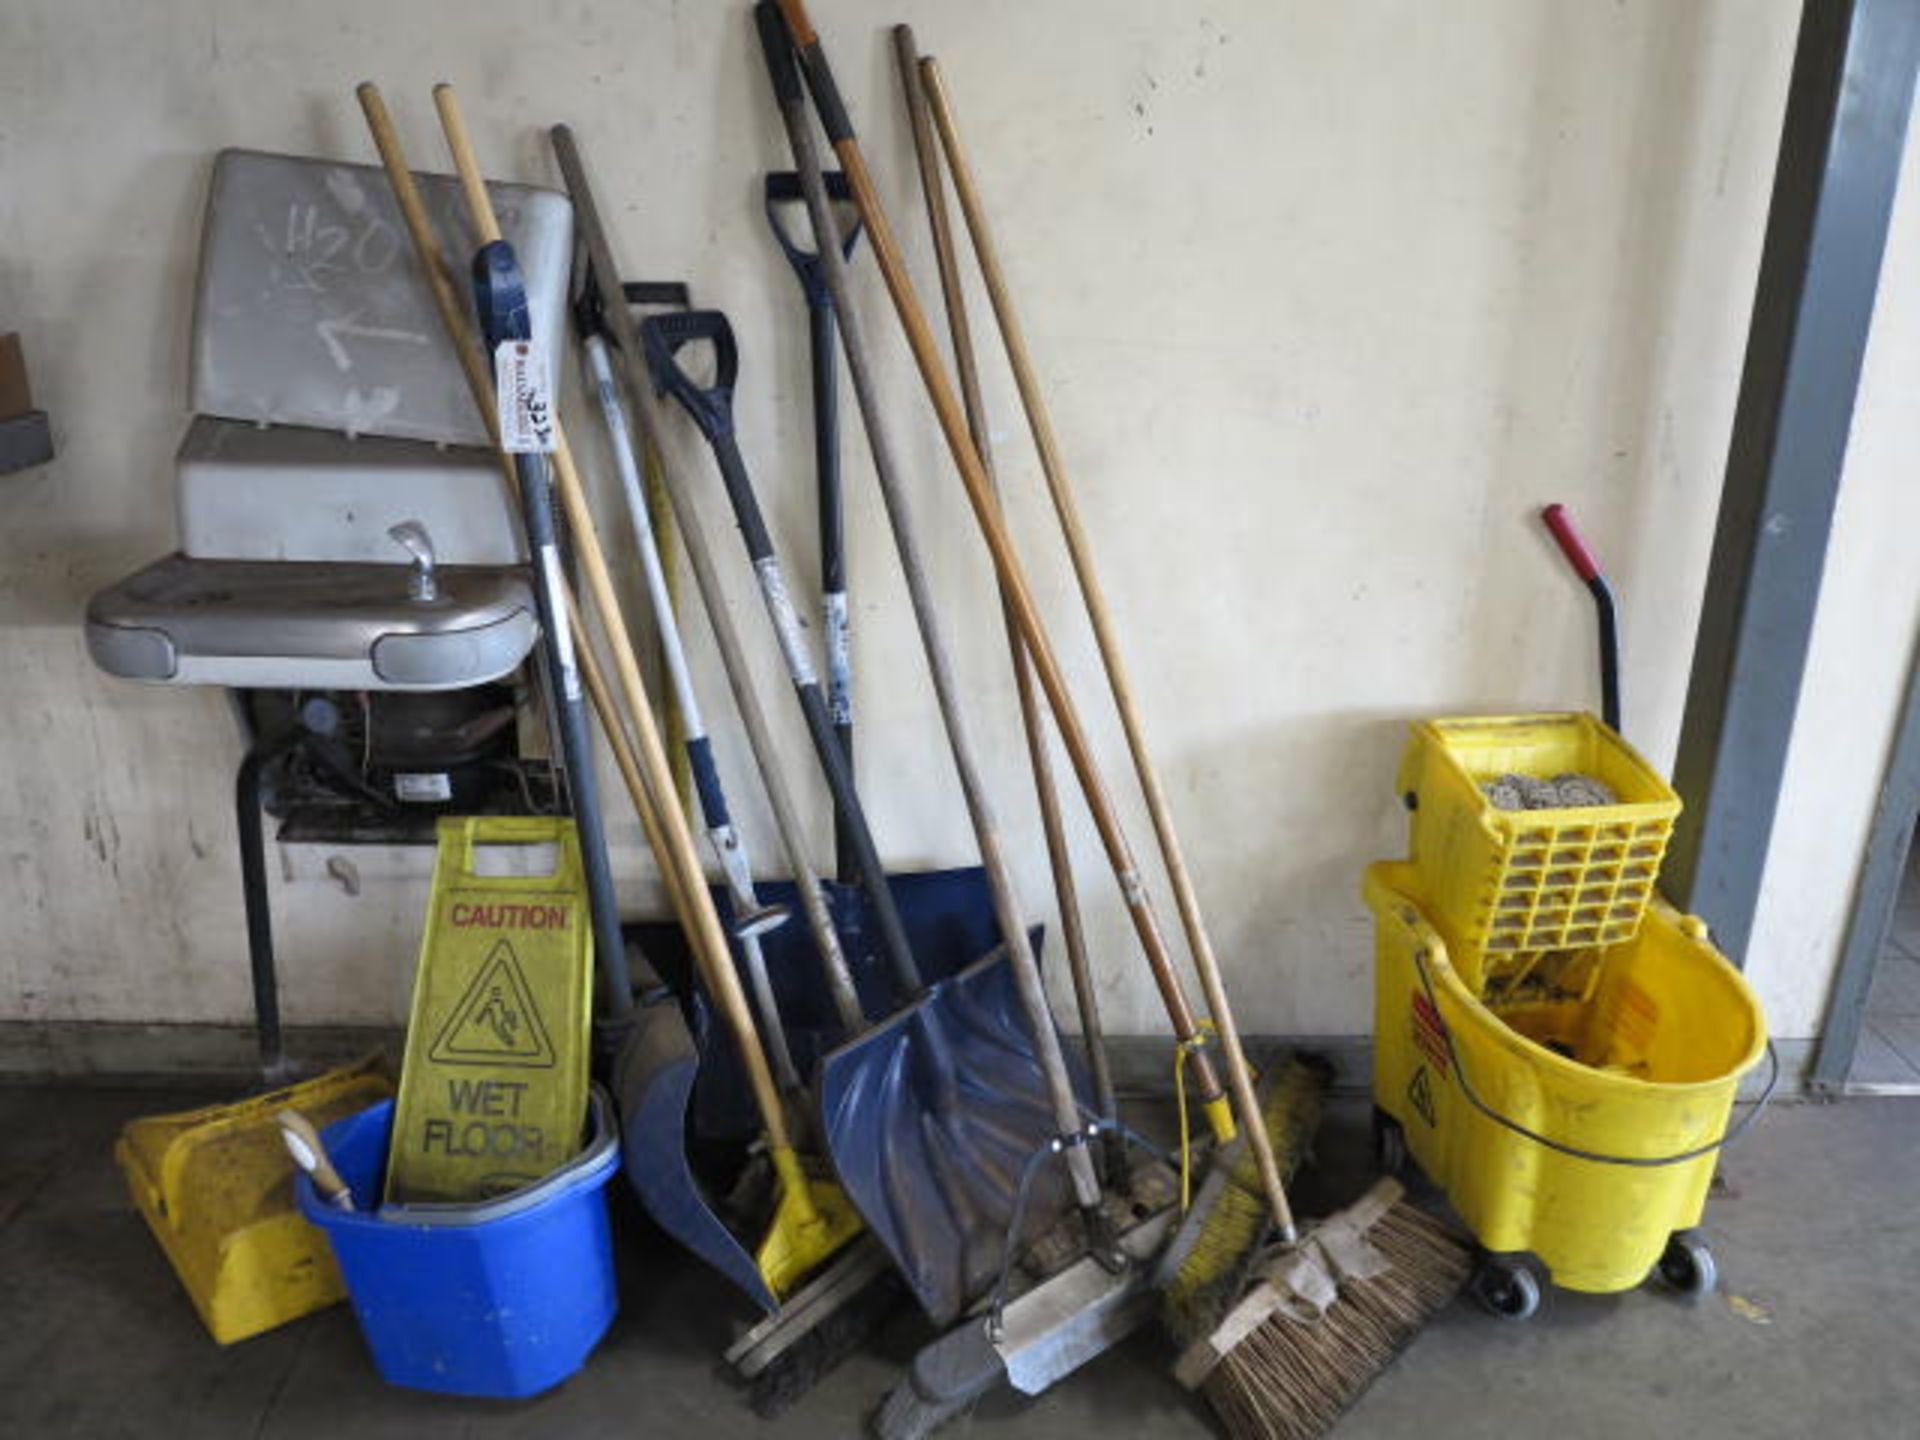 Lot Brooms and Shovels Location: Swansea MA